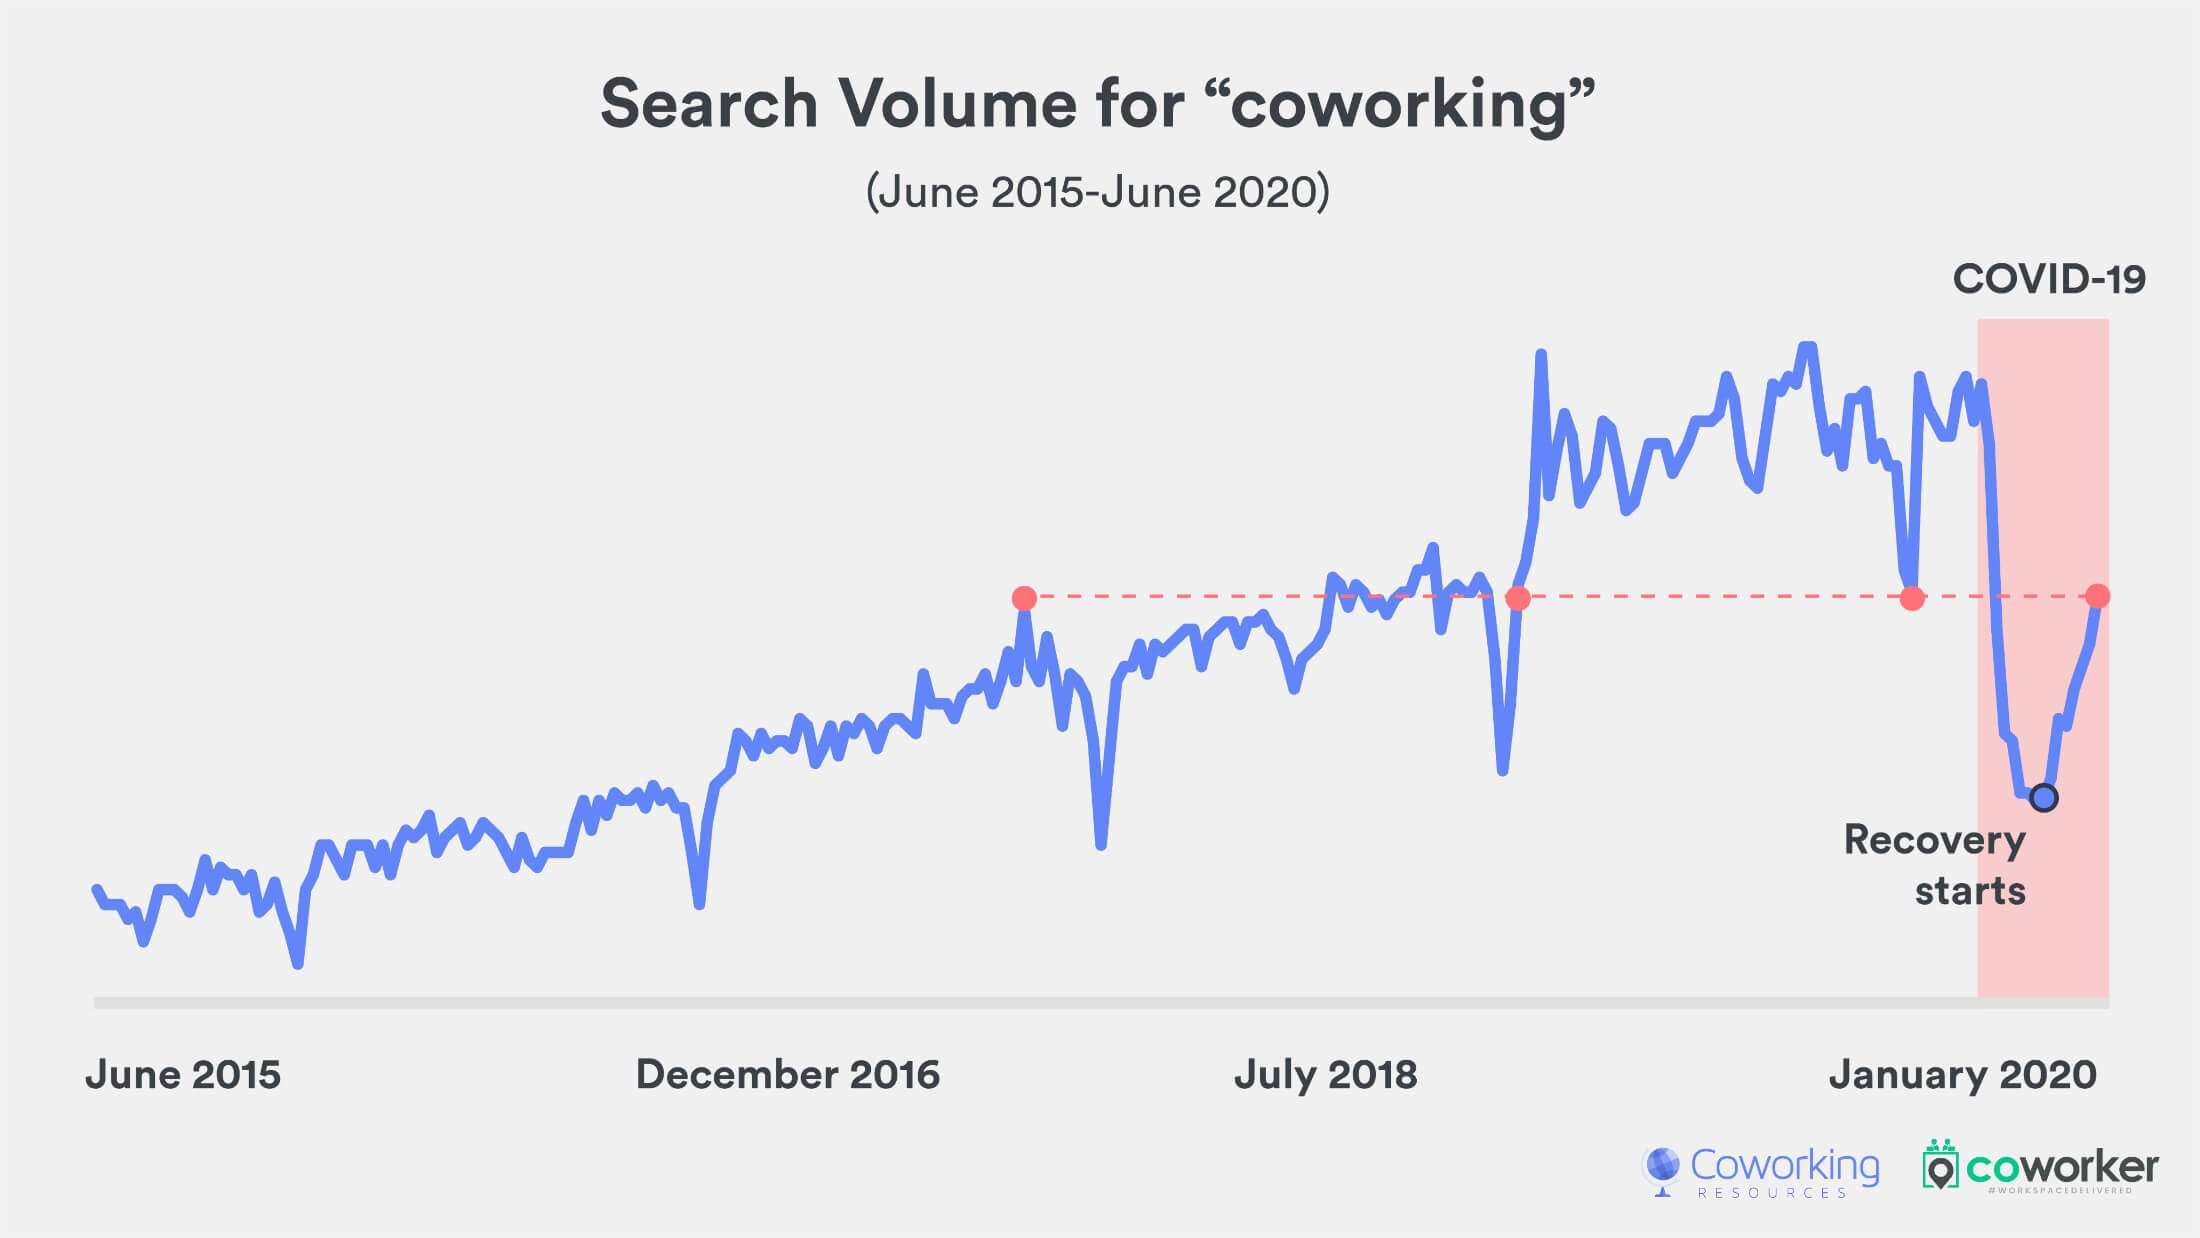 Historical demand for coworking and impact of Covid-19